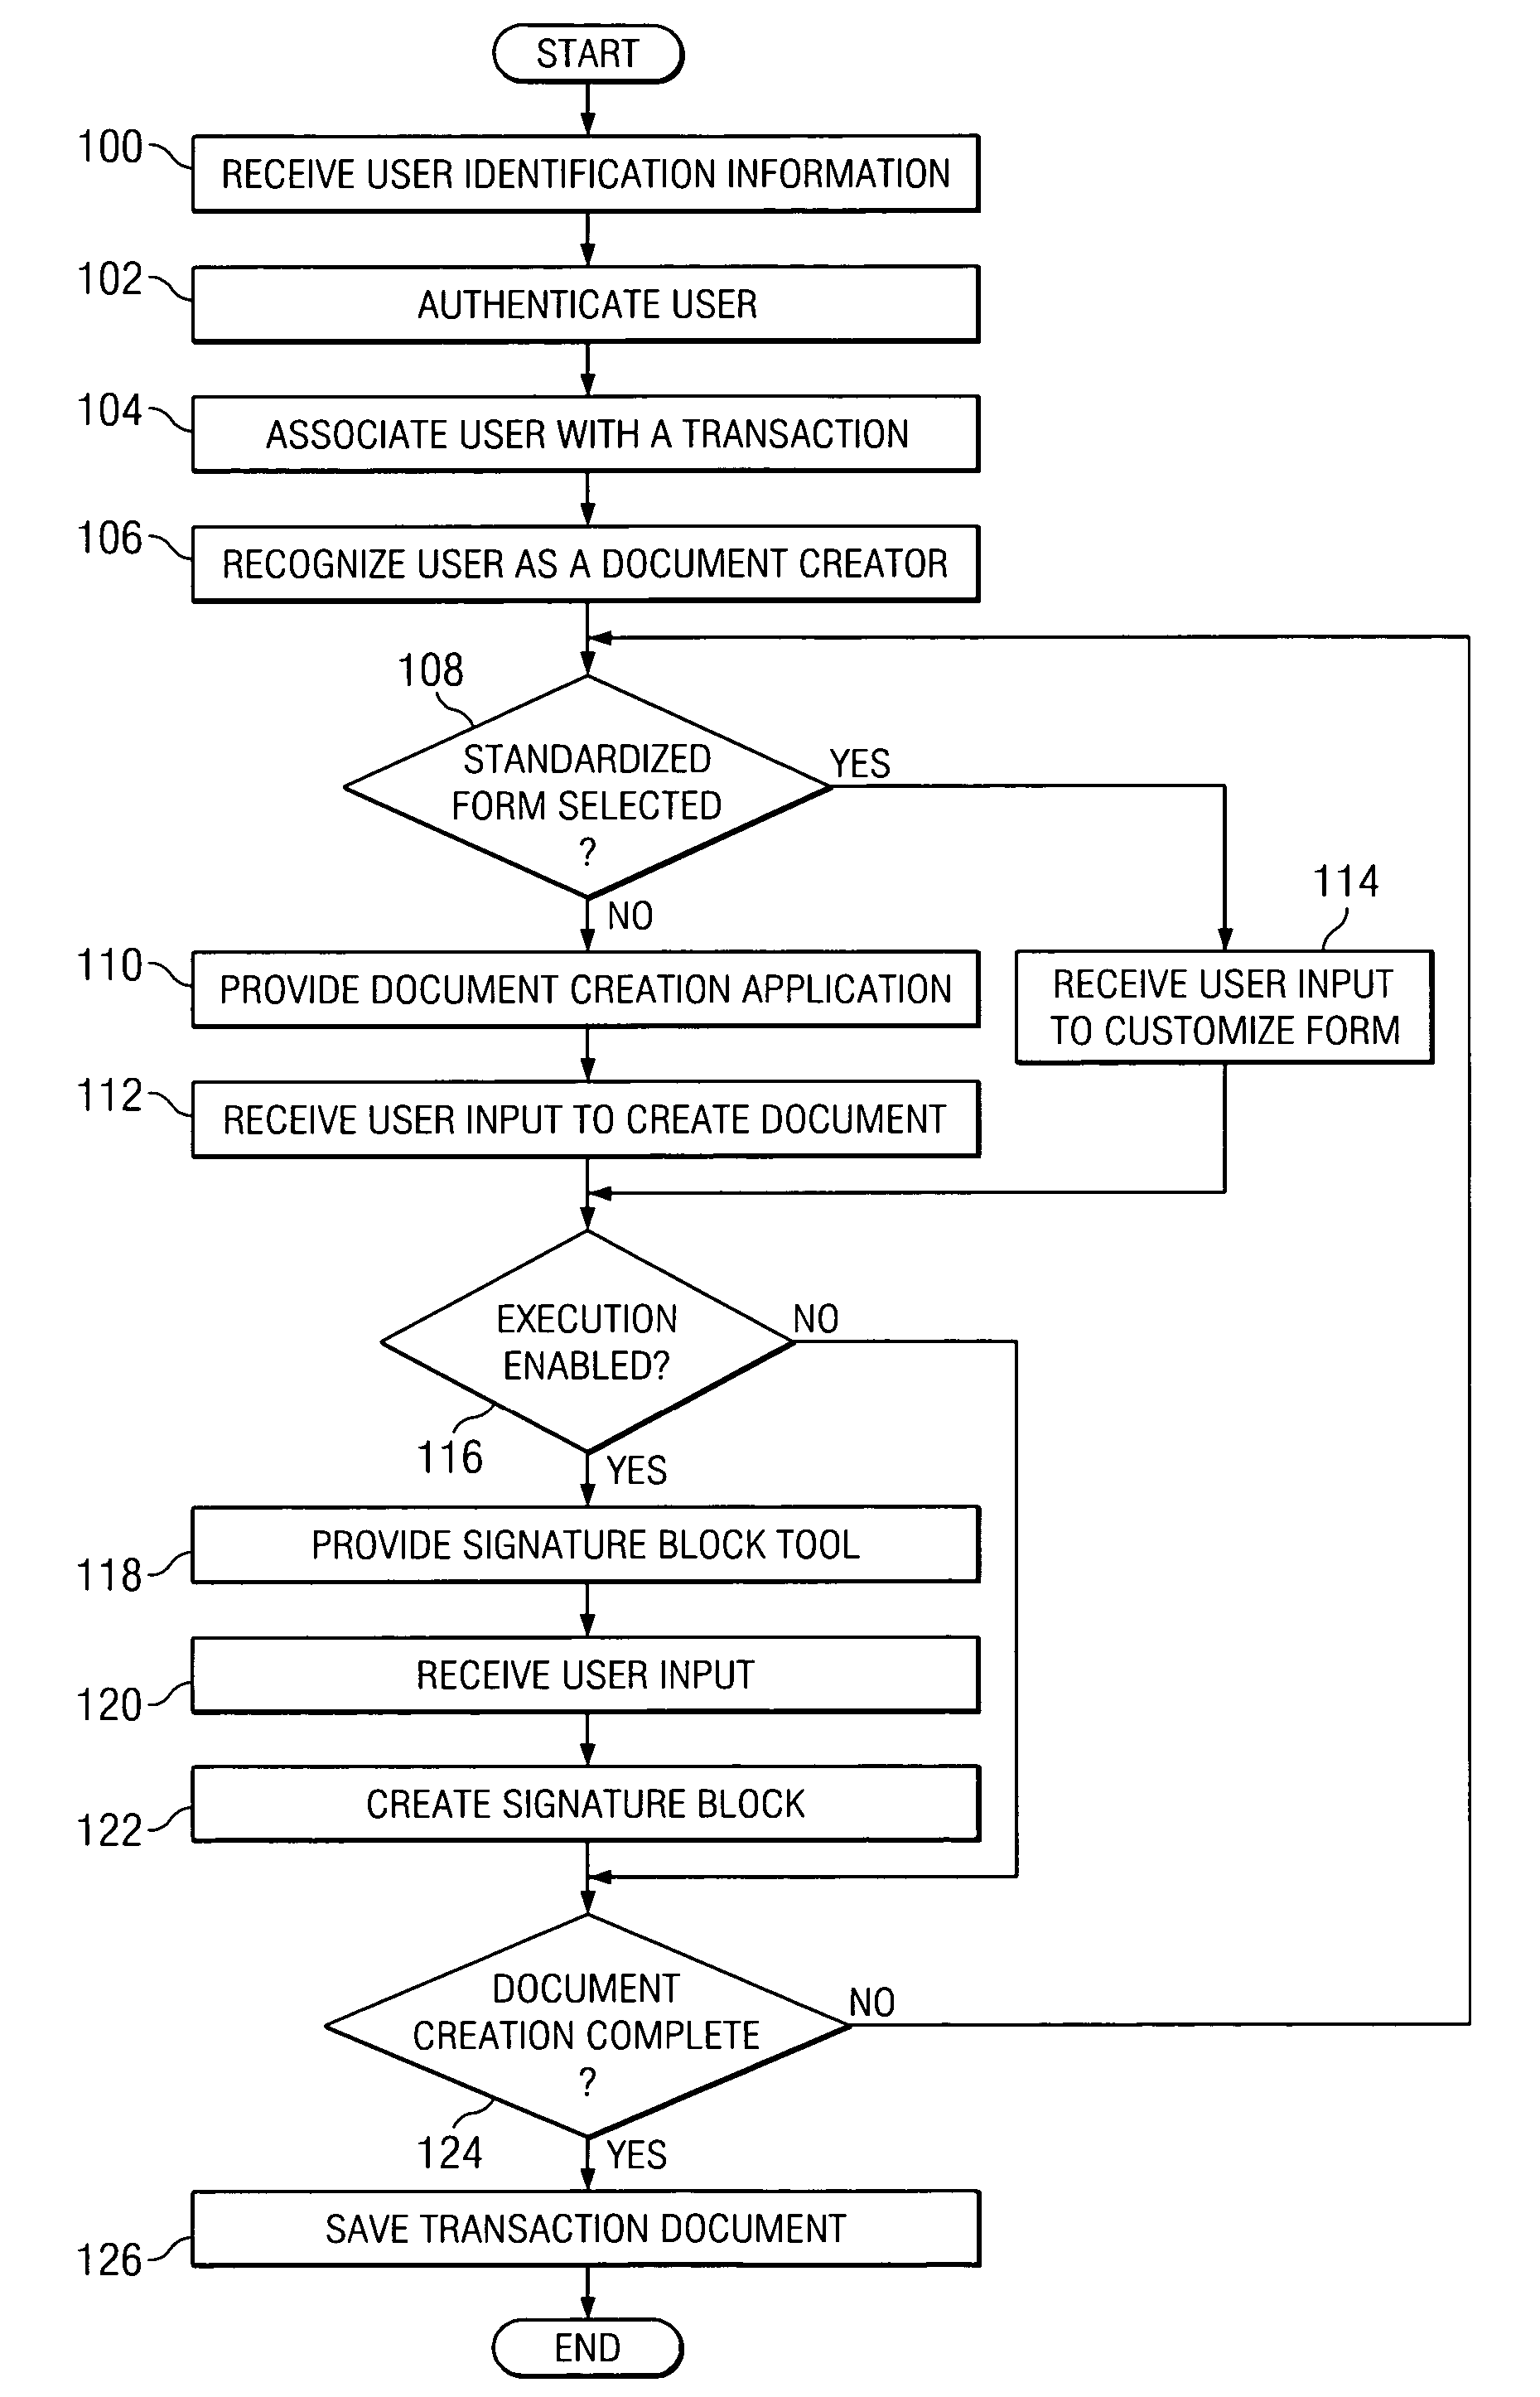 System and method for the electronic management and execution of transaction documents